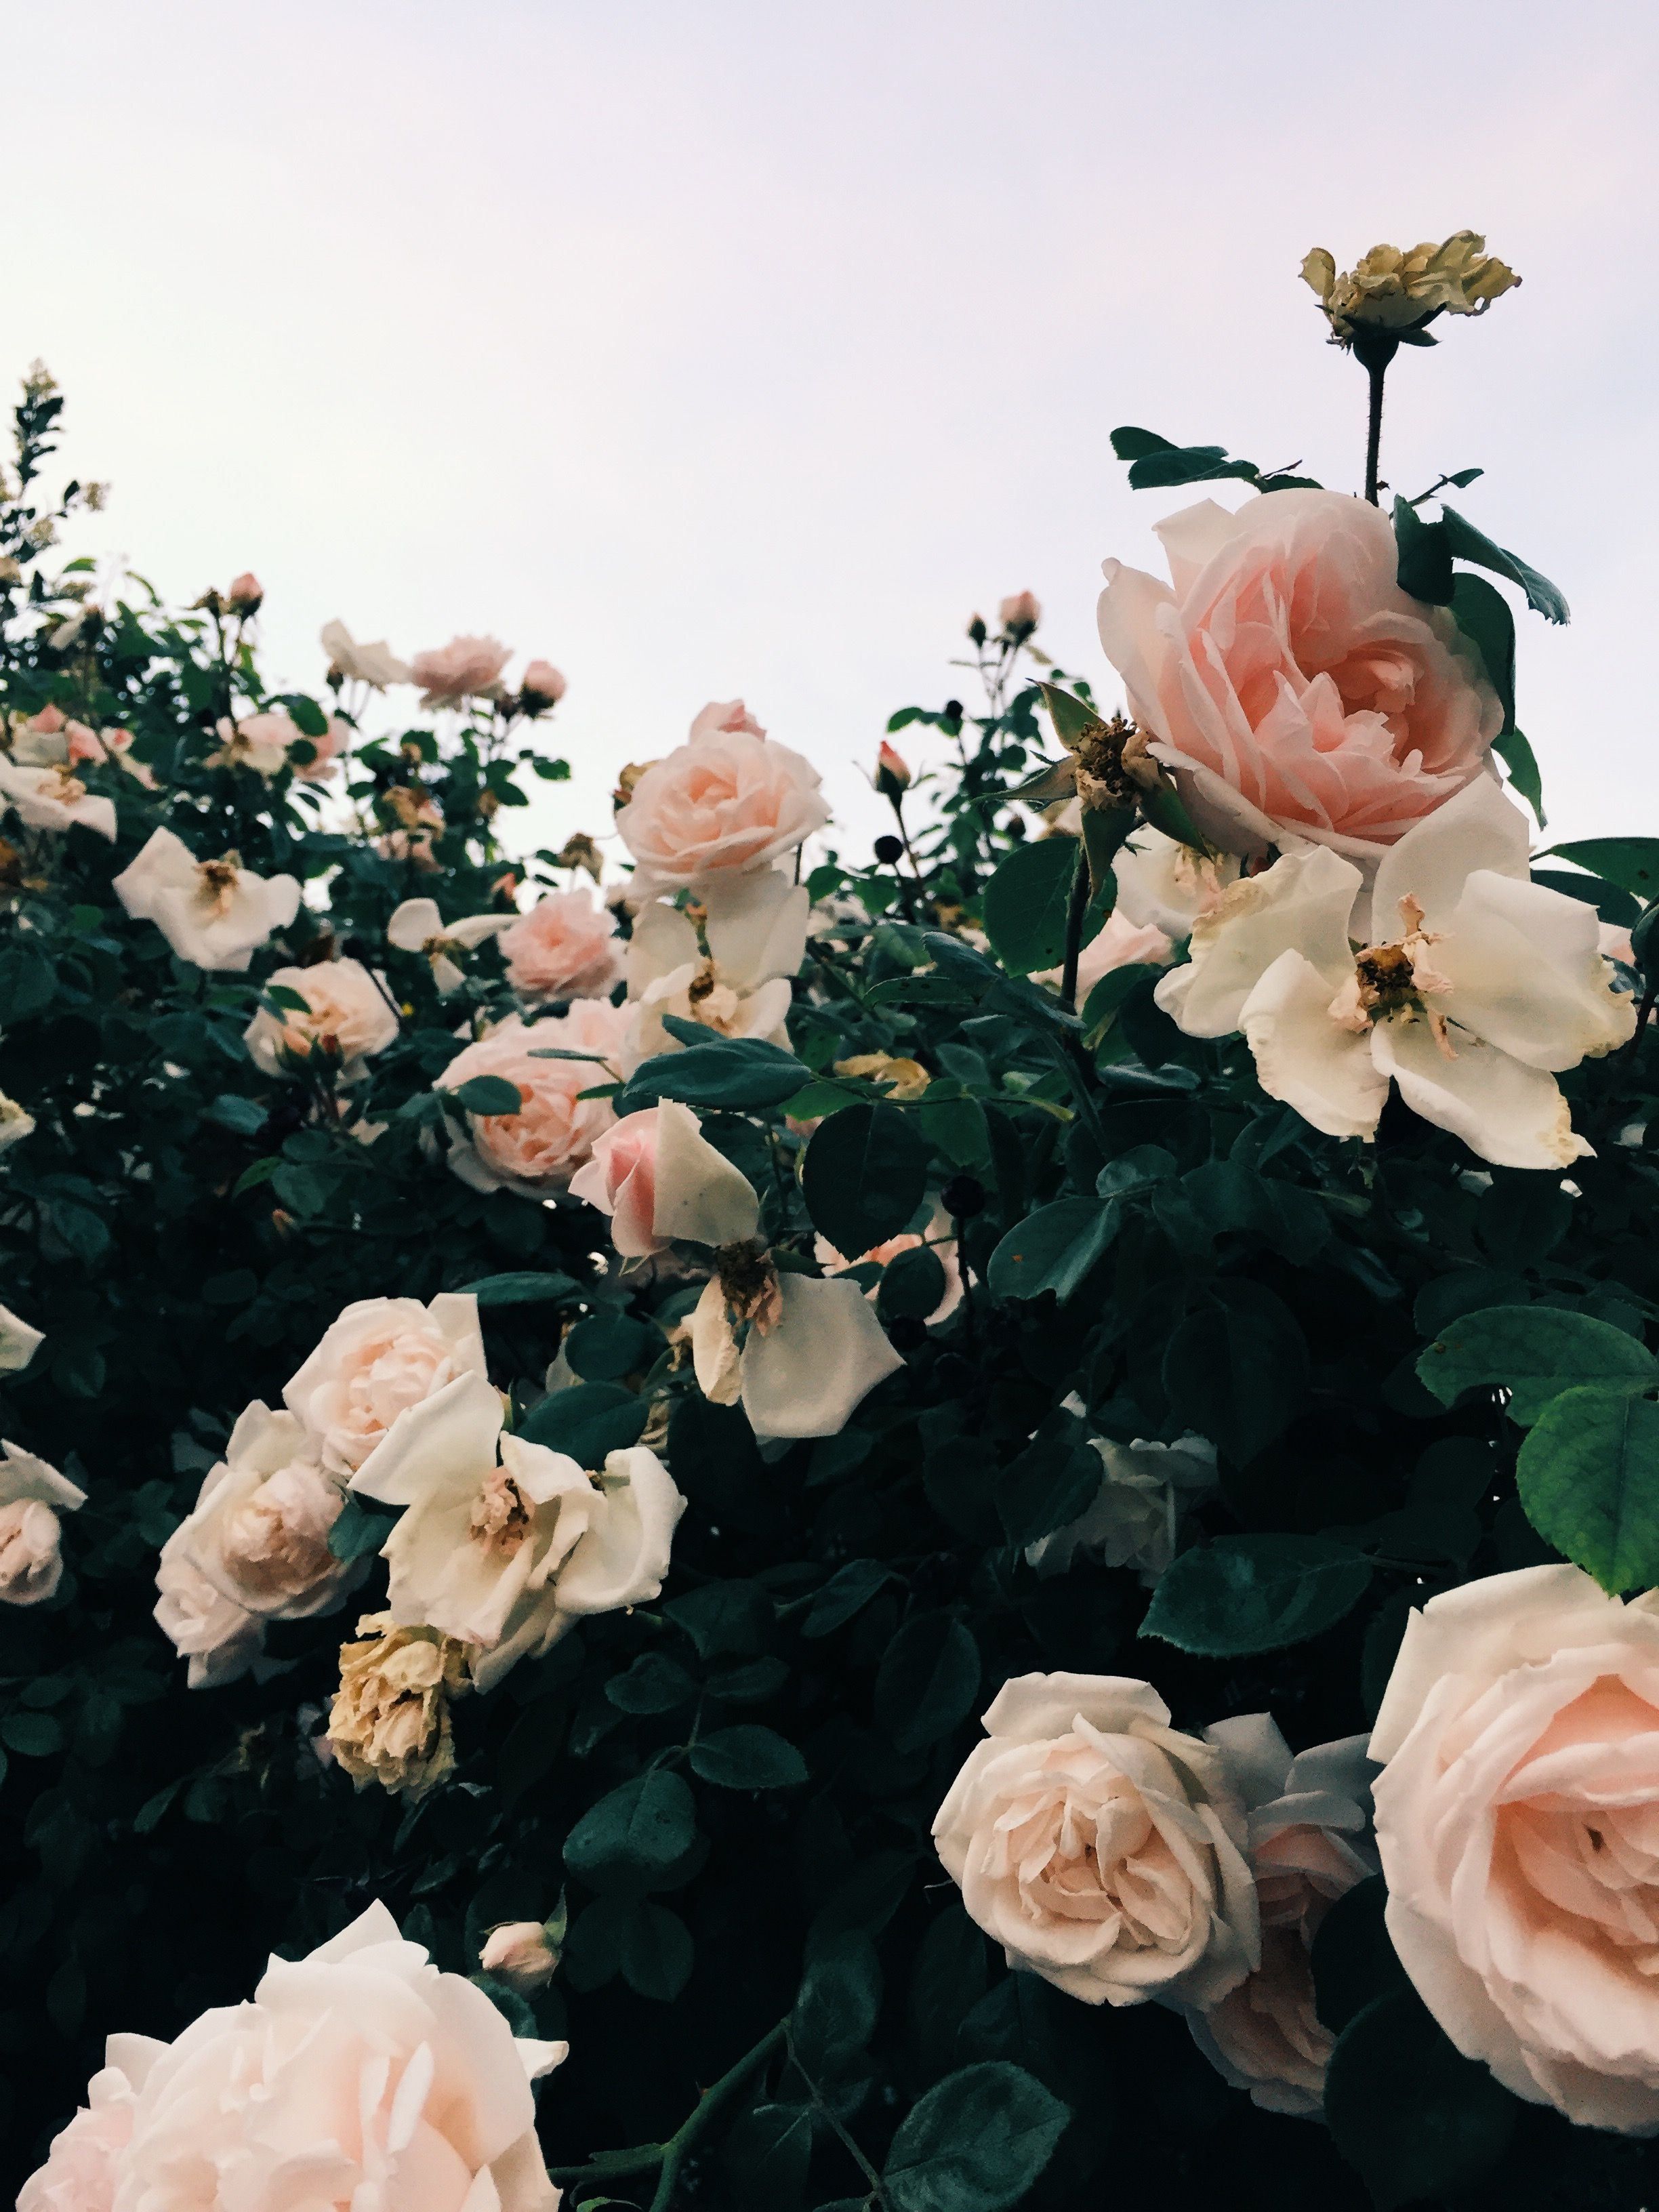 Aesthetic Rose Wallpapers posted by Zoey Sellers